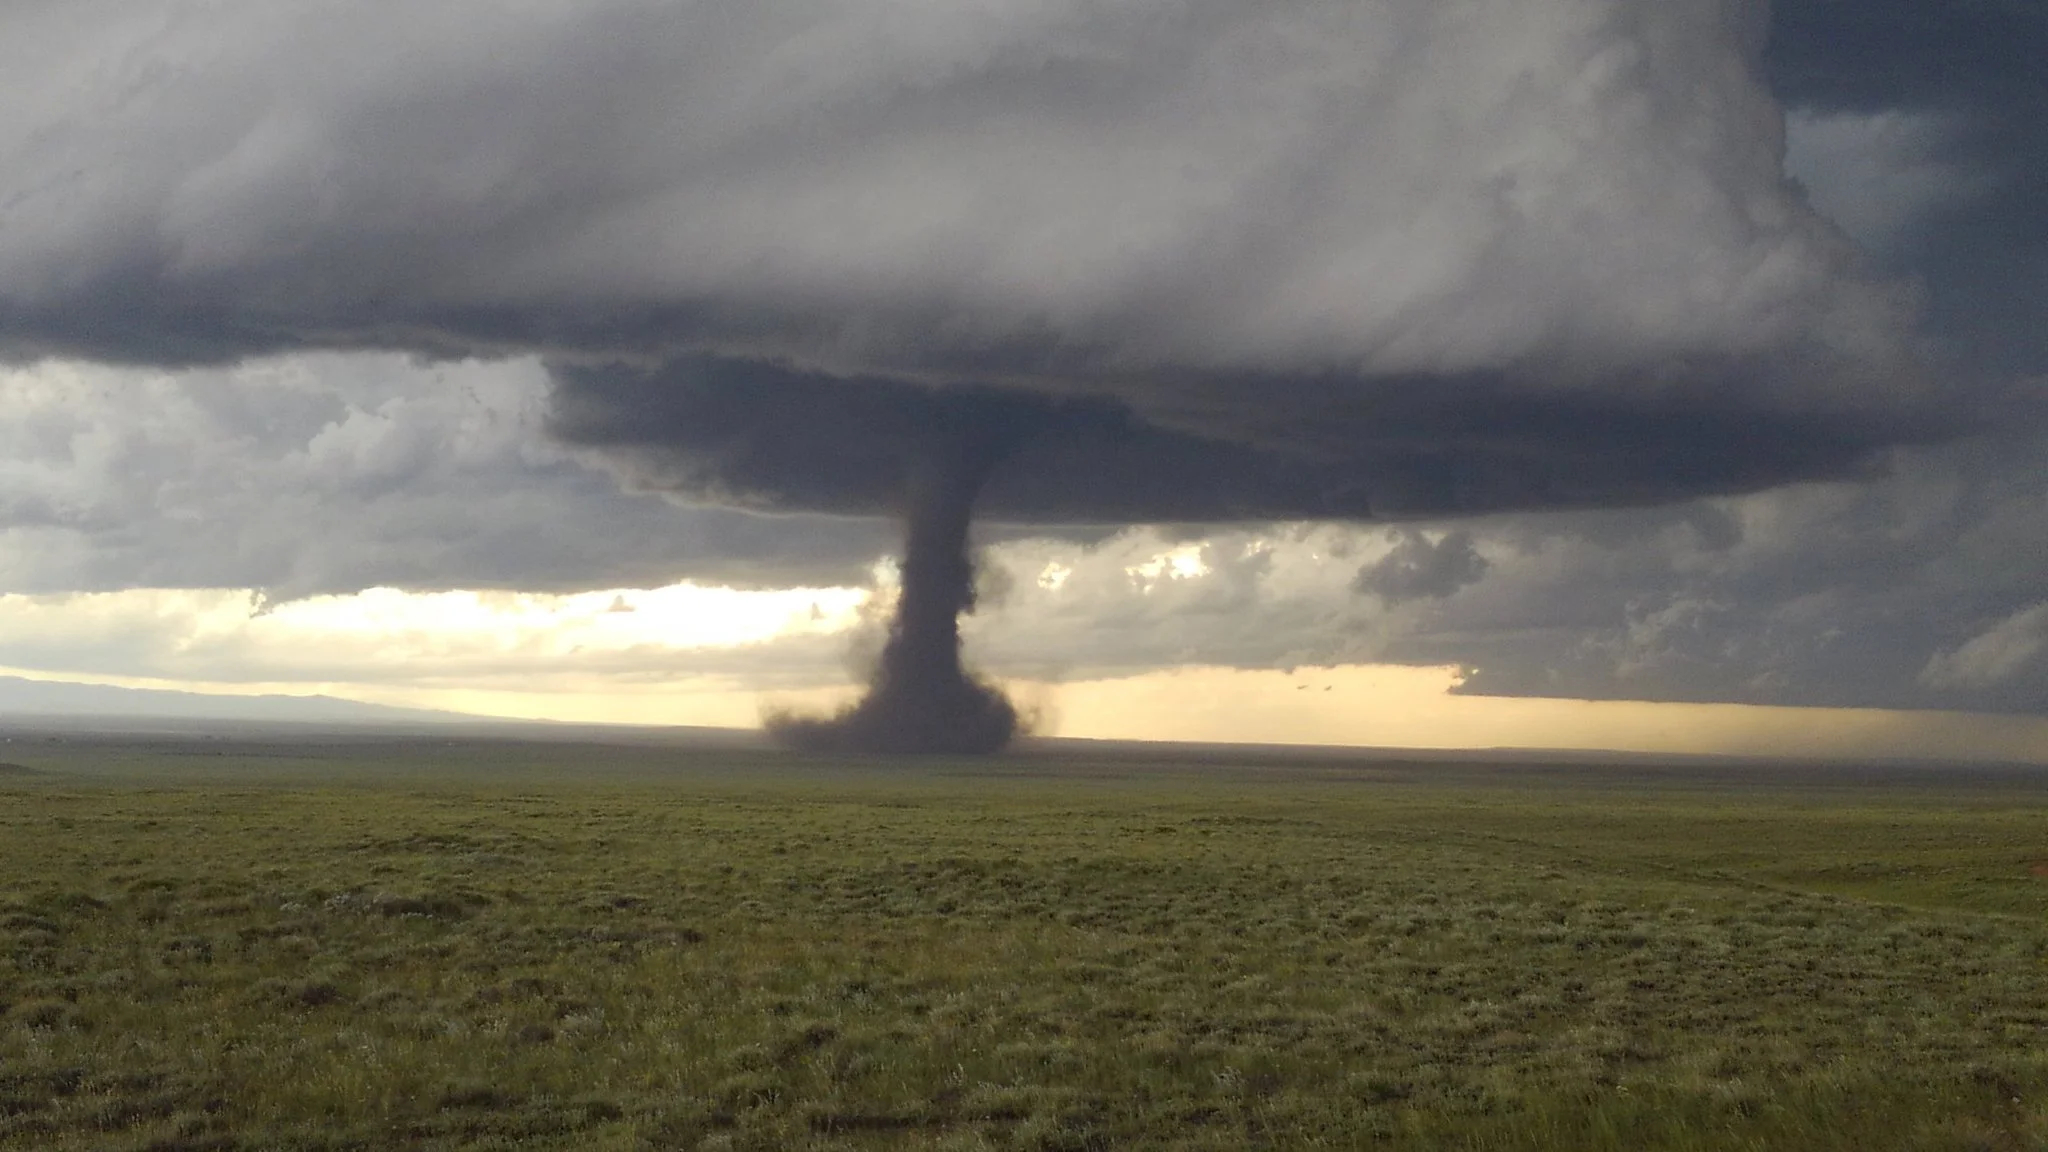 2048x1152 Incredible Photos of Wyoming Tornado Shot on a Phone | Time